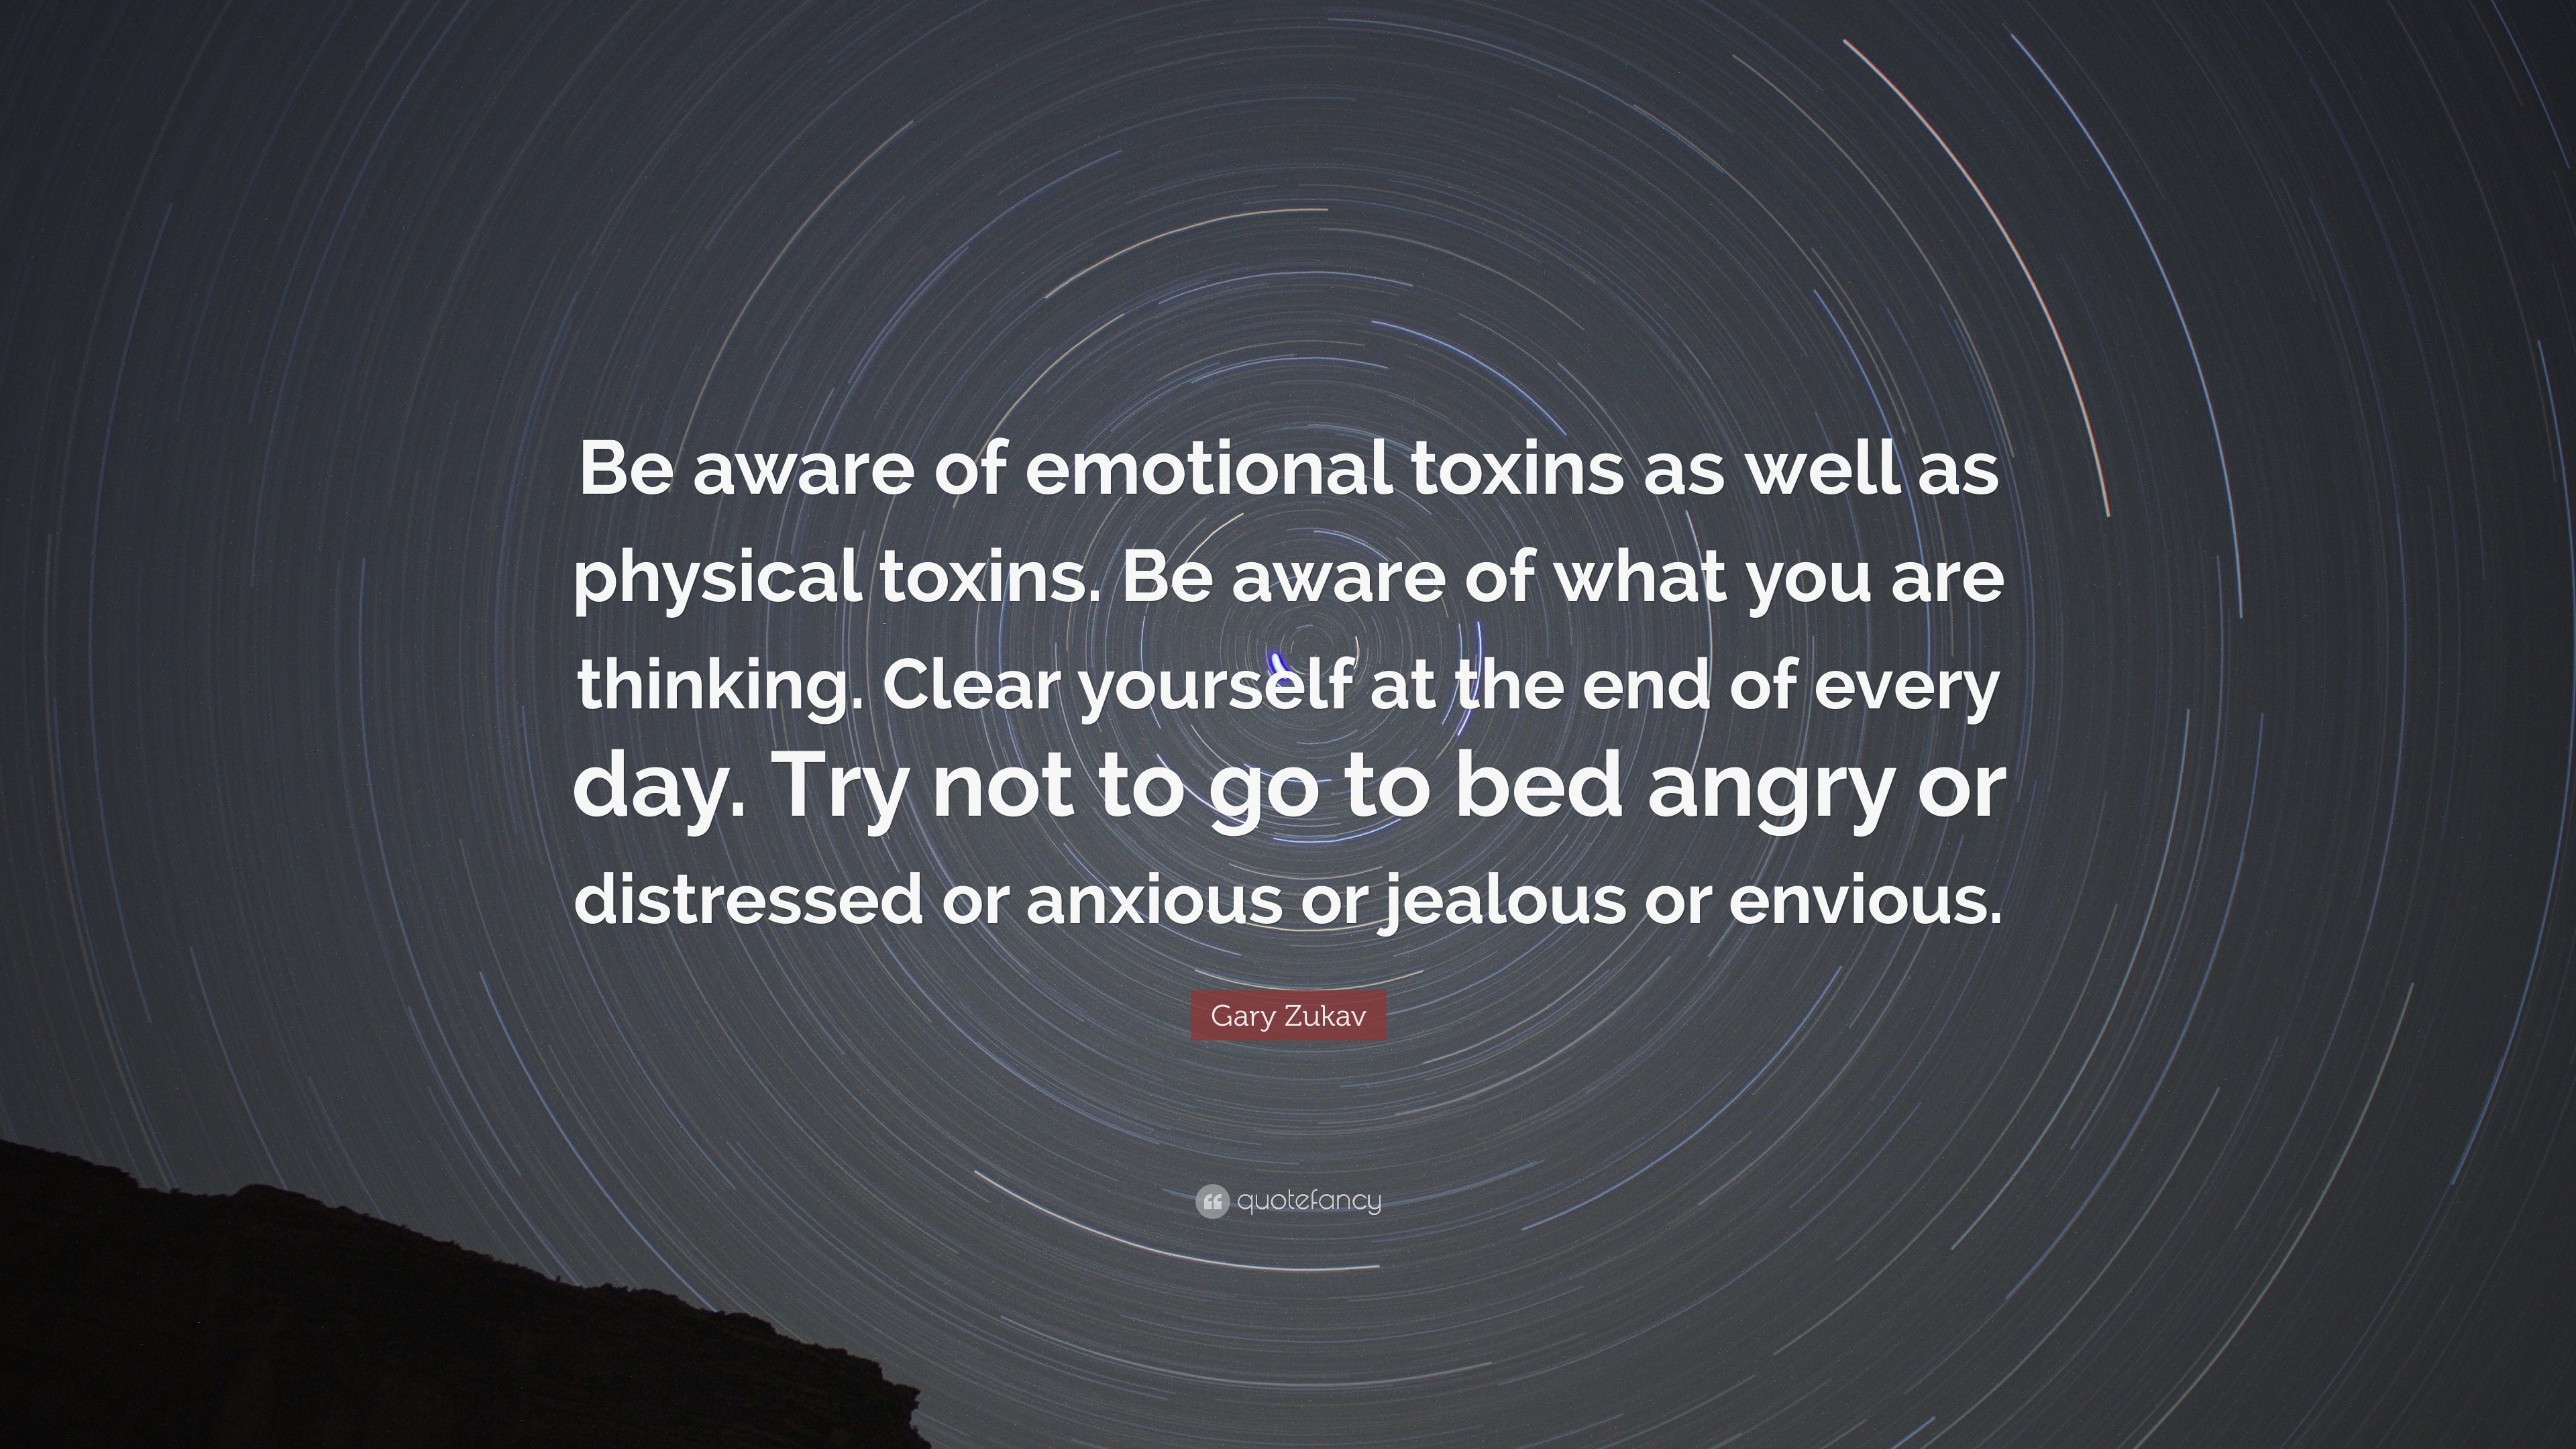 3840x2160 Gary Zukav Quote: “Be aware of emotional toxins as well as physical toxins.